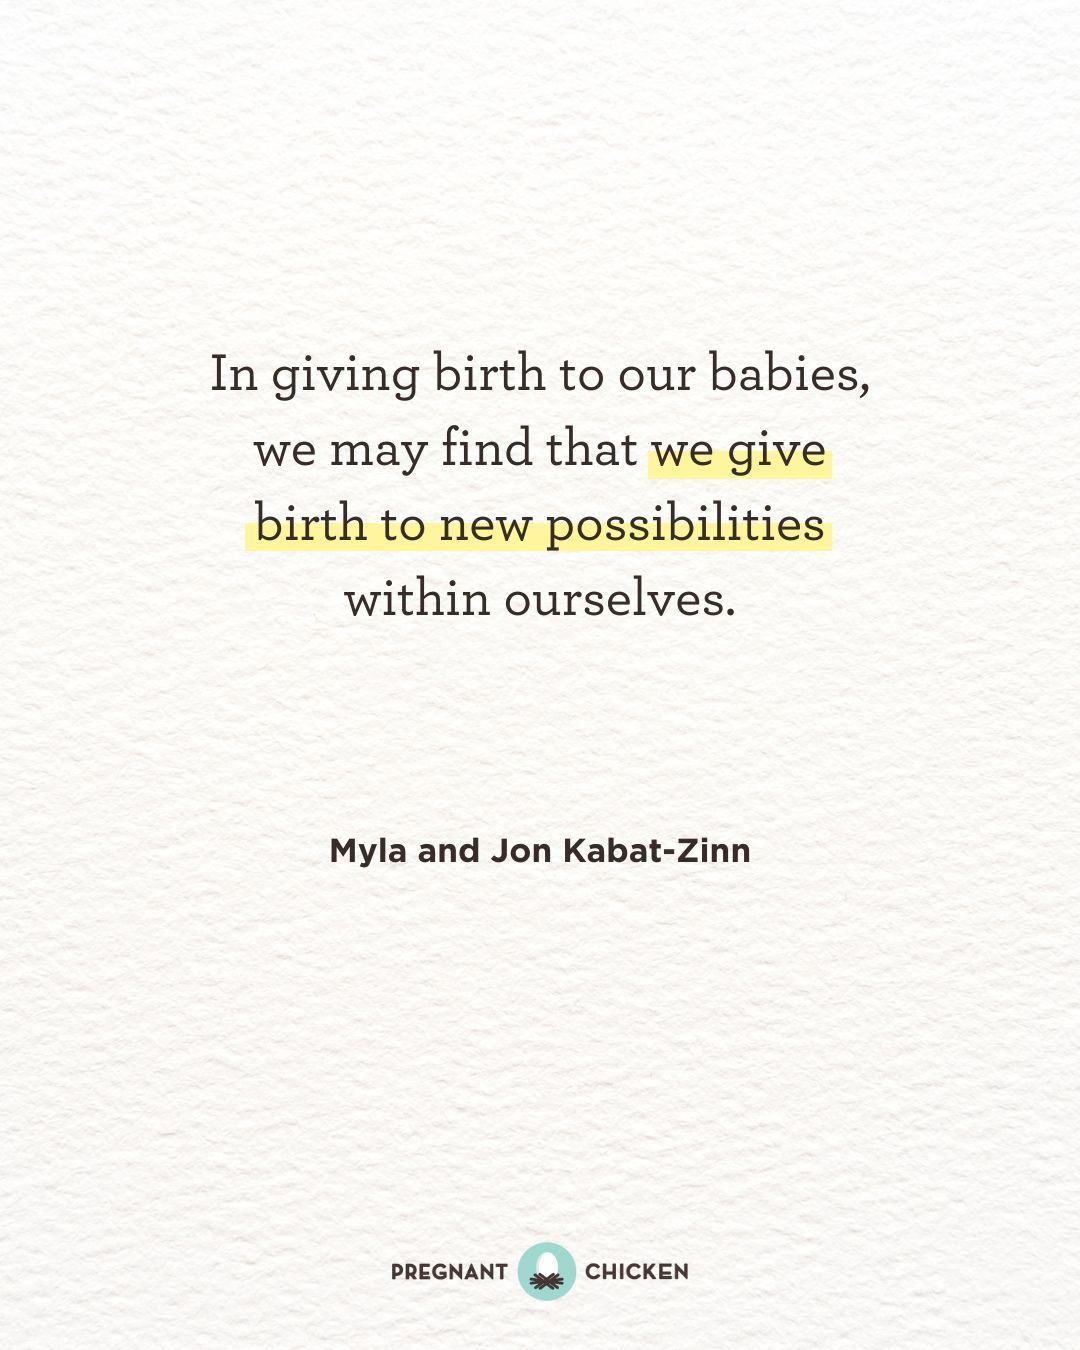 In giving birth to our babies, we may find that we give birth to new possibilities within ourselves.